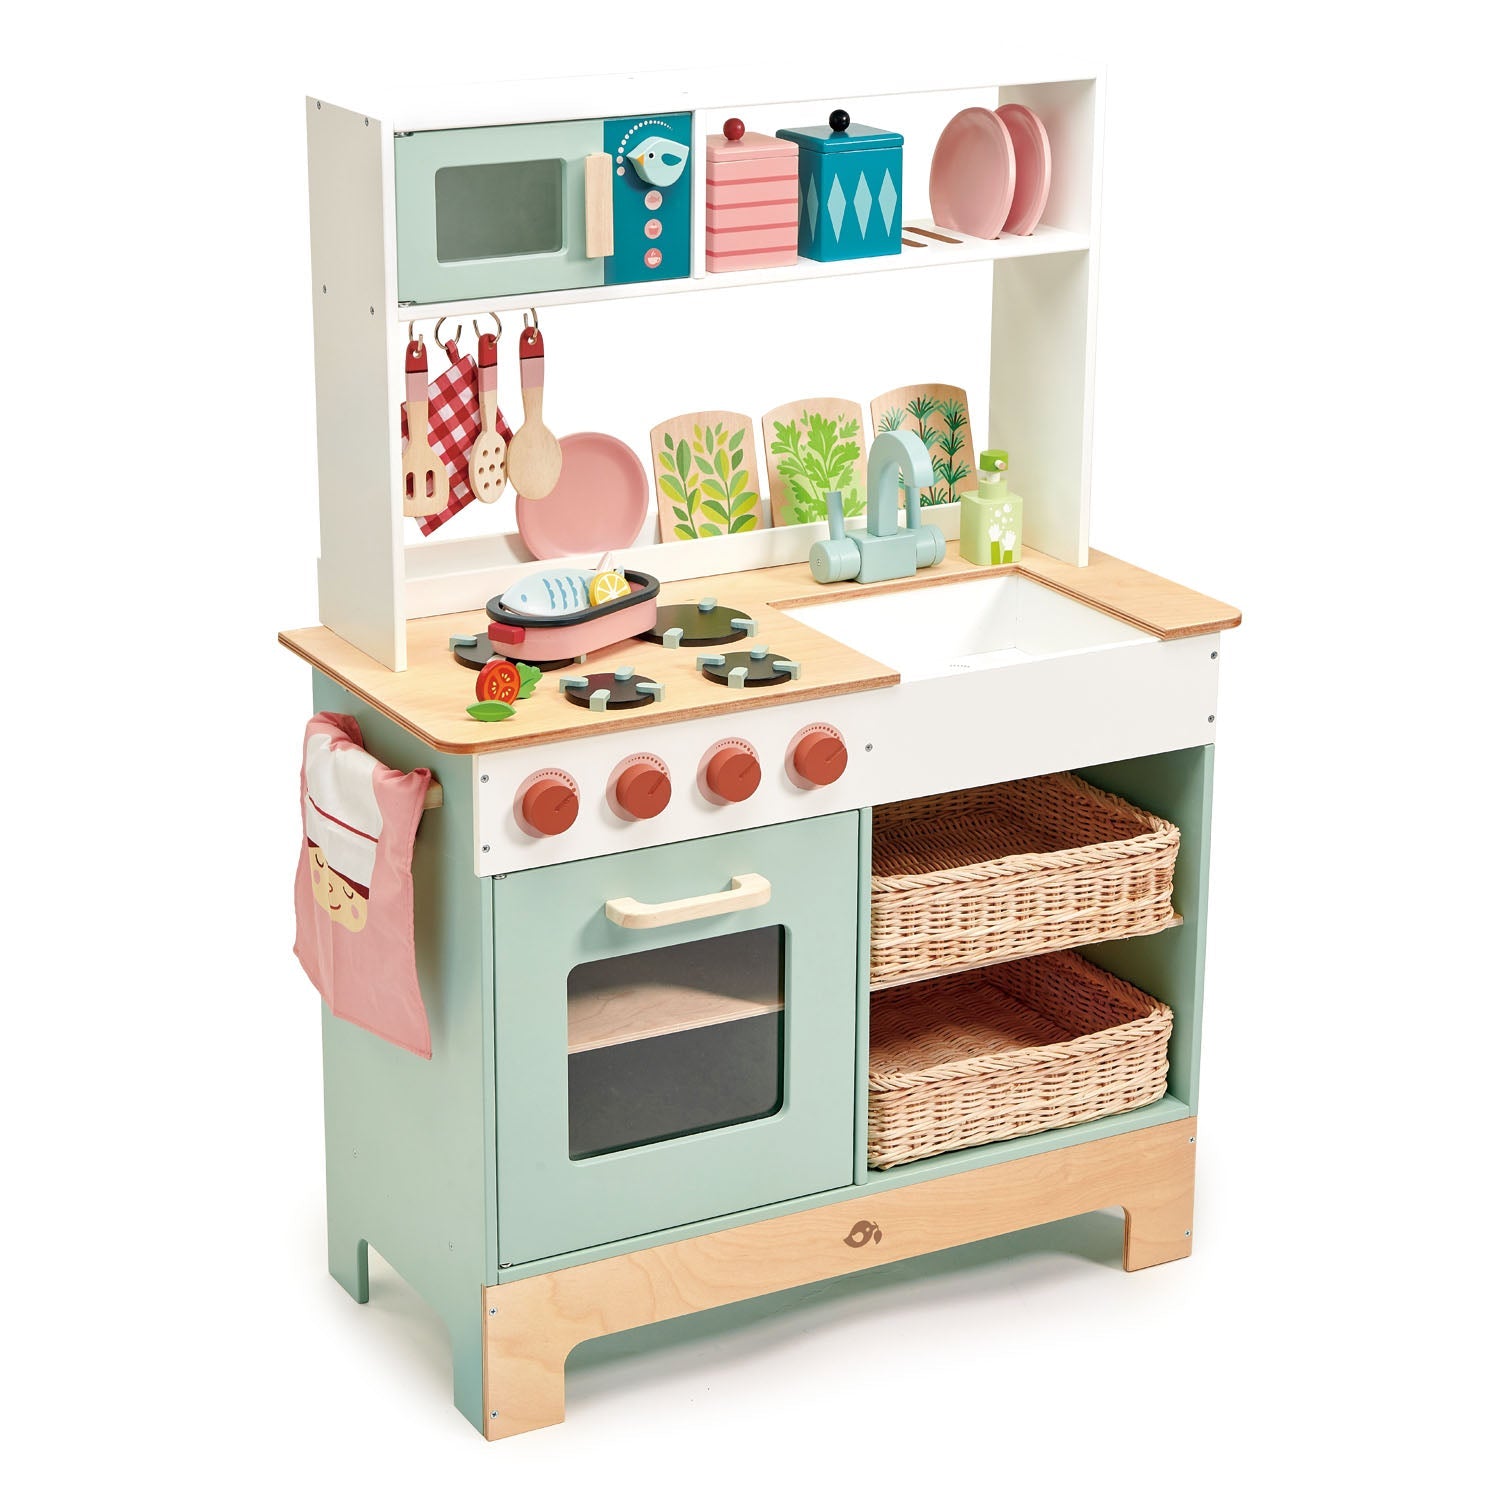 Tender Leaf Toys Kitchen Range - A beautifully designed, expansive wooden play kitchen with oven, cooker hobs, and microwave. Includes play food, modern wicker basket drawers, and accessories for pretend cooking